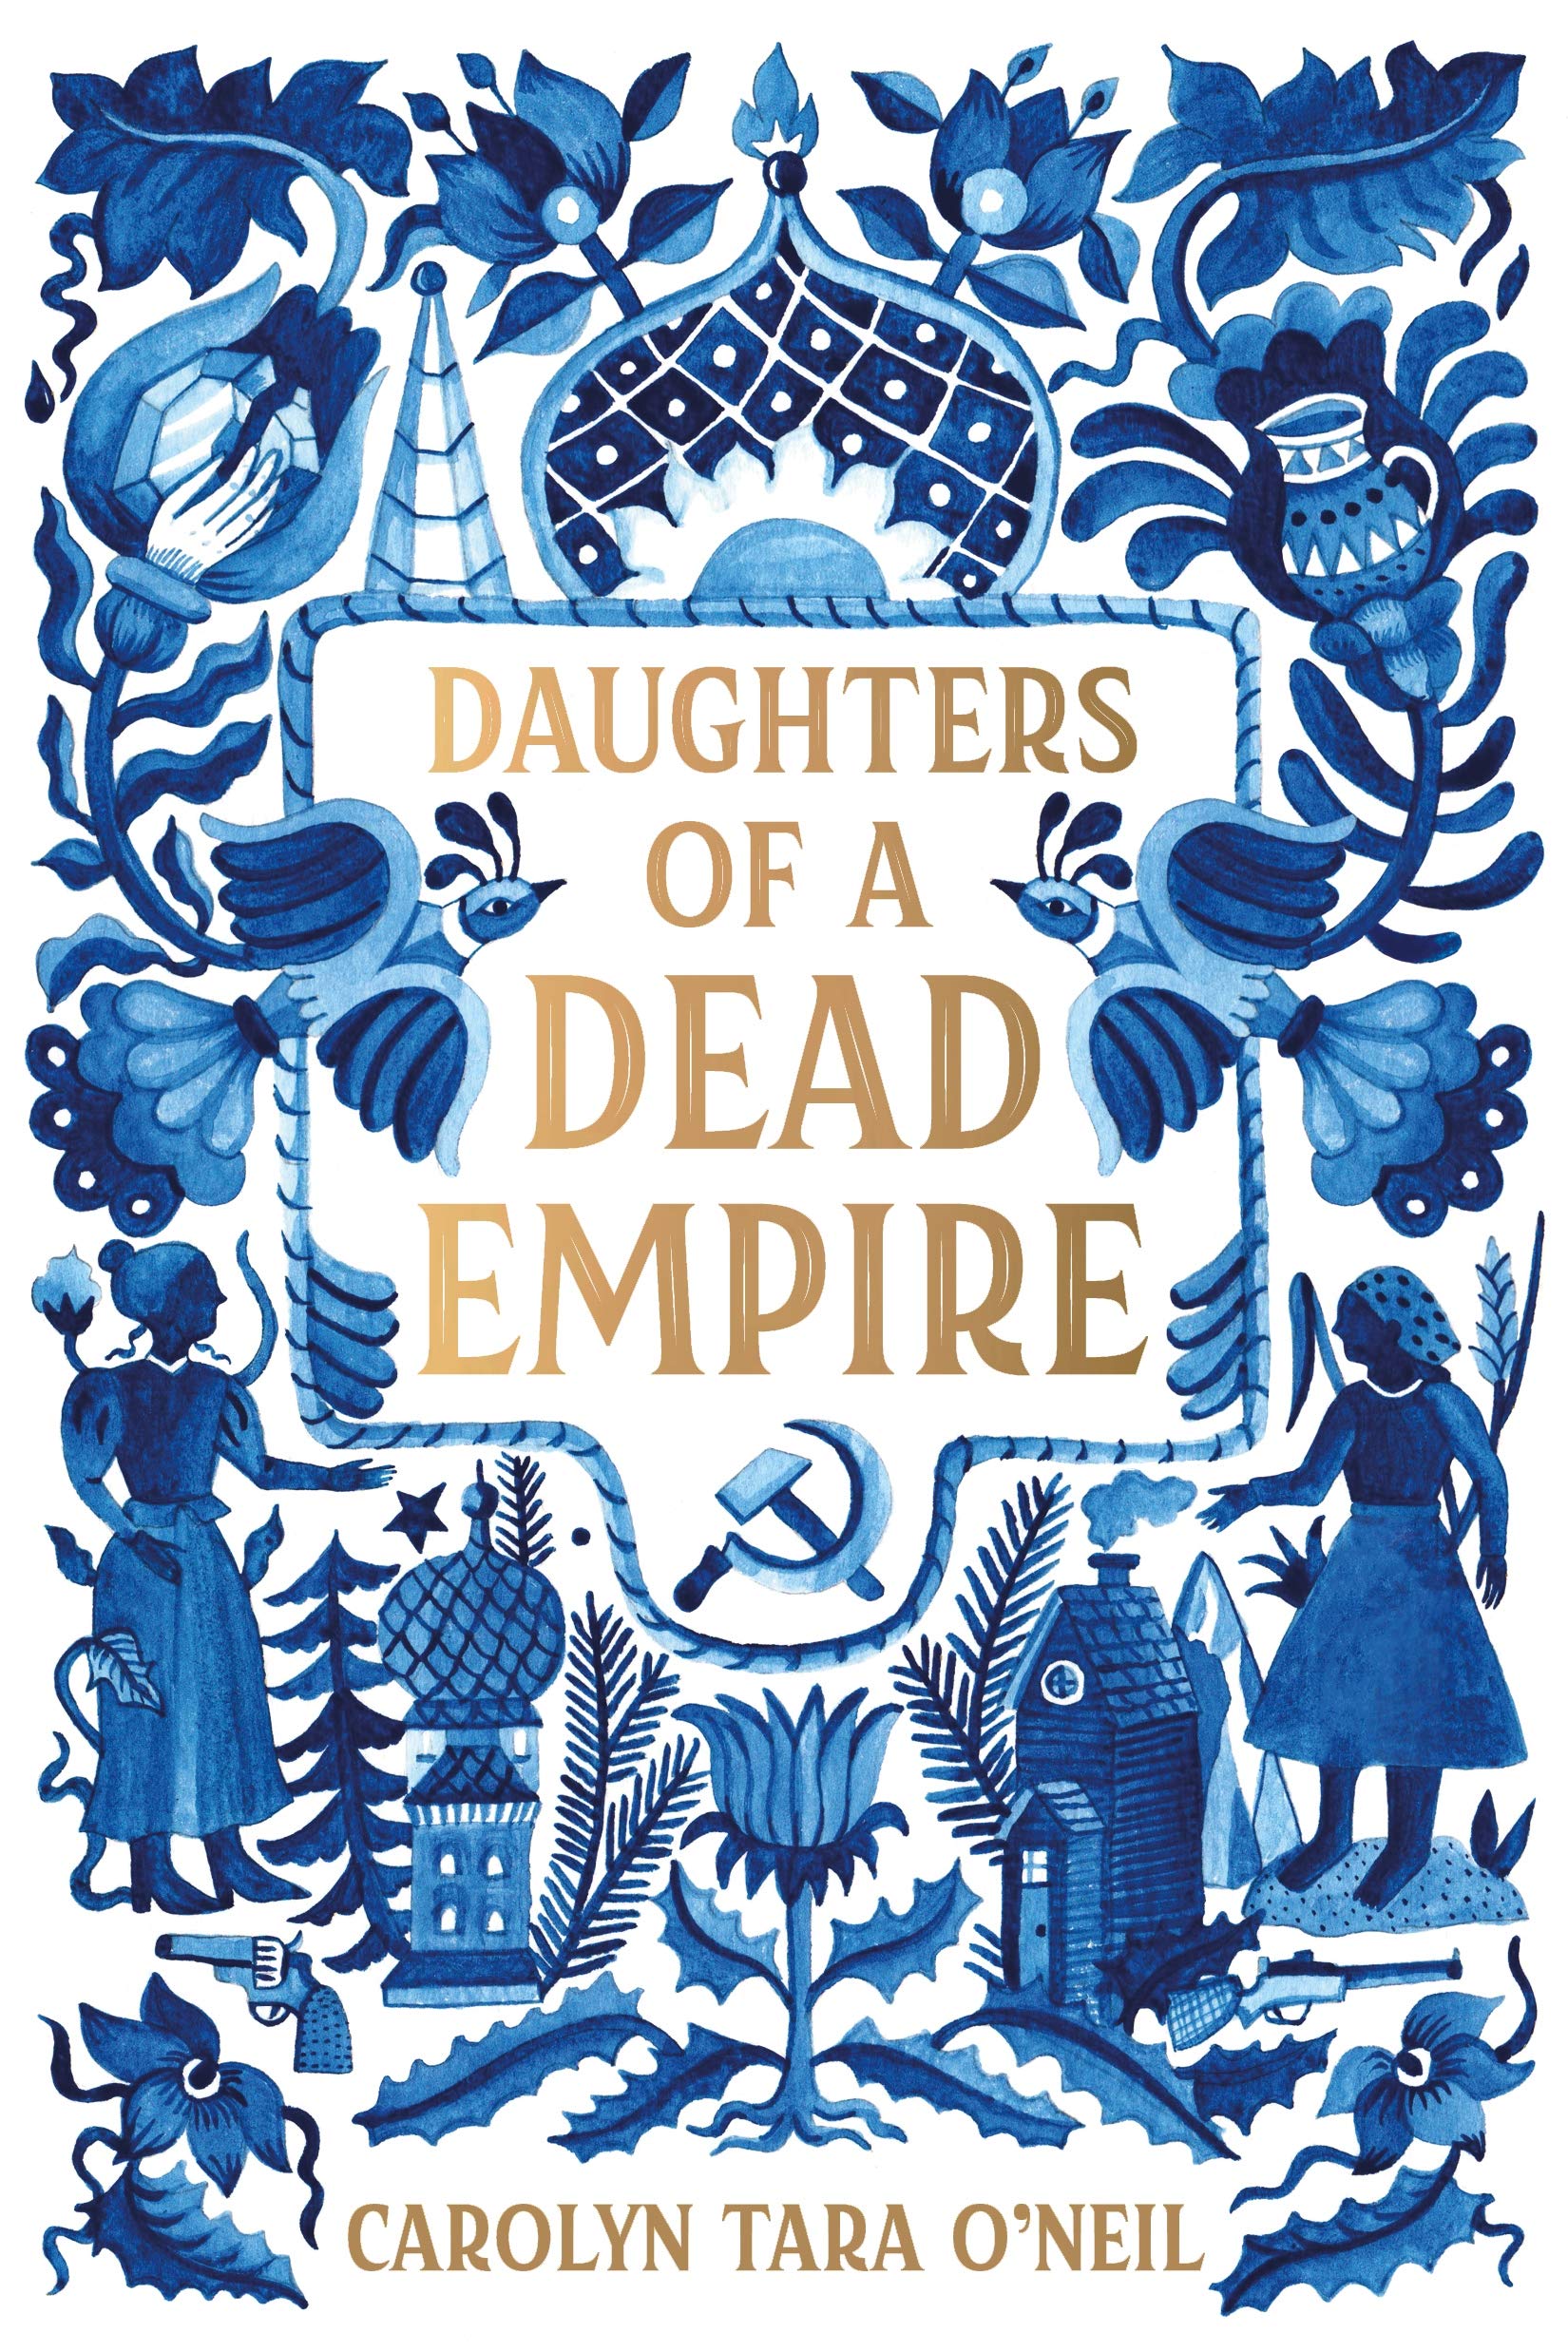 Daughters of a Dead Empire by Carolyn Tara O'Neil